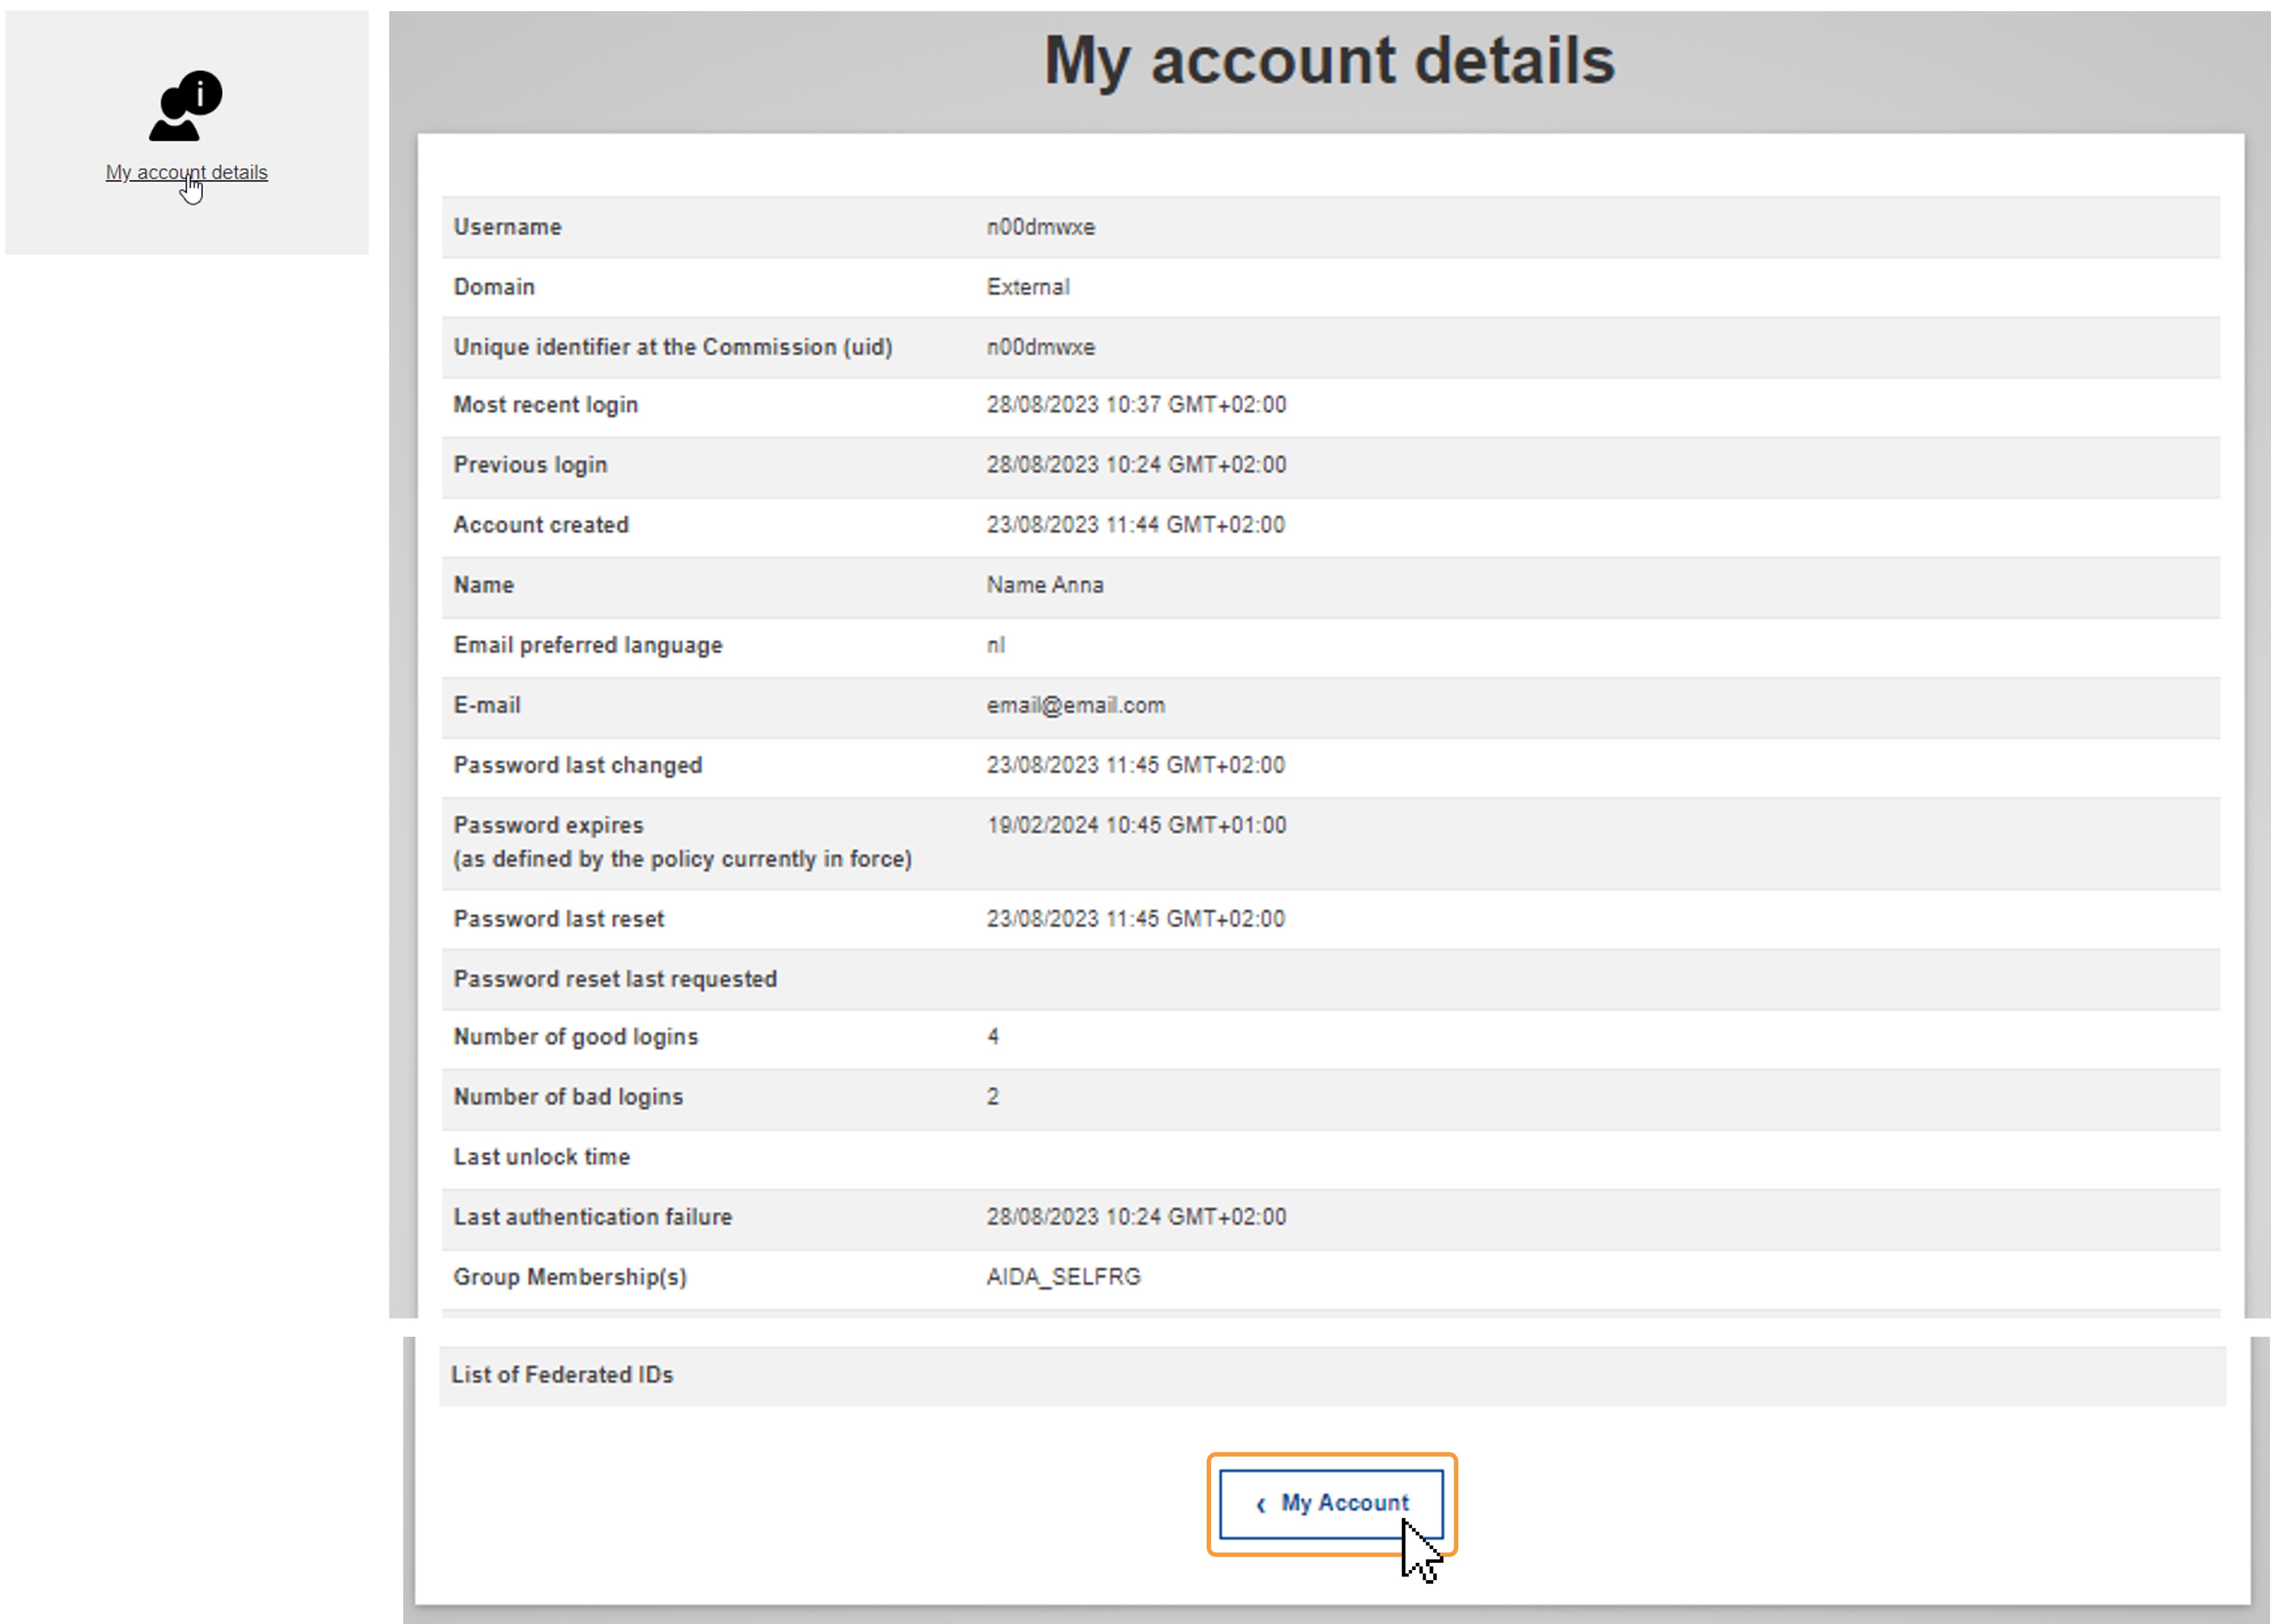 My account details screen